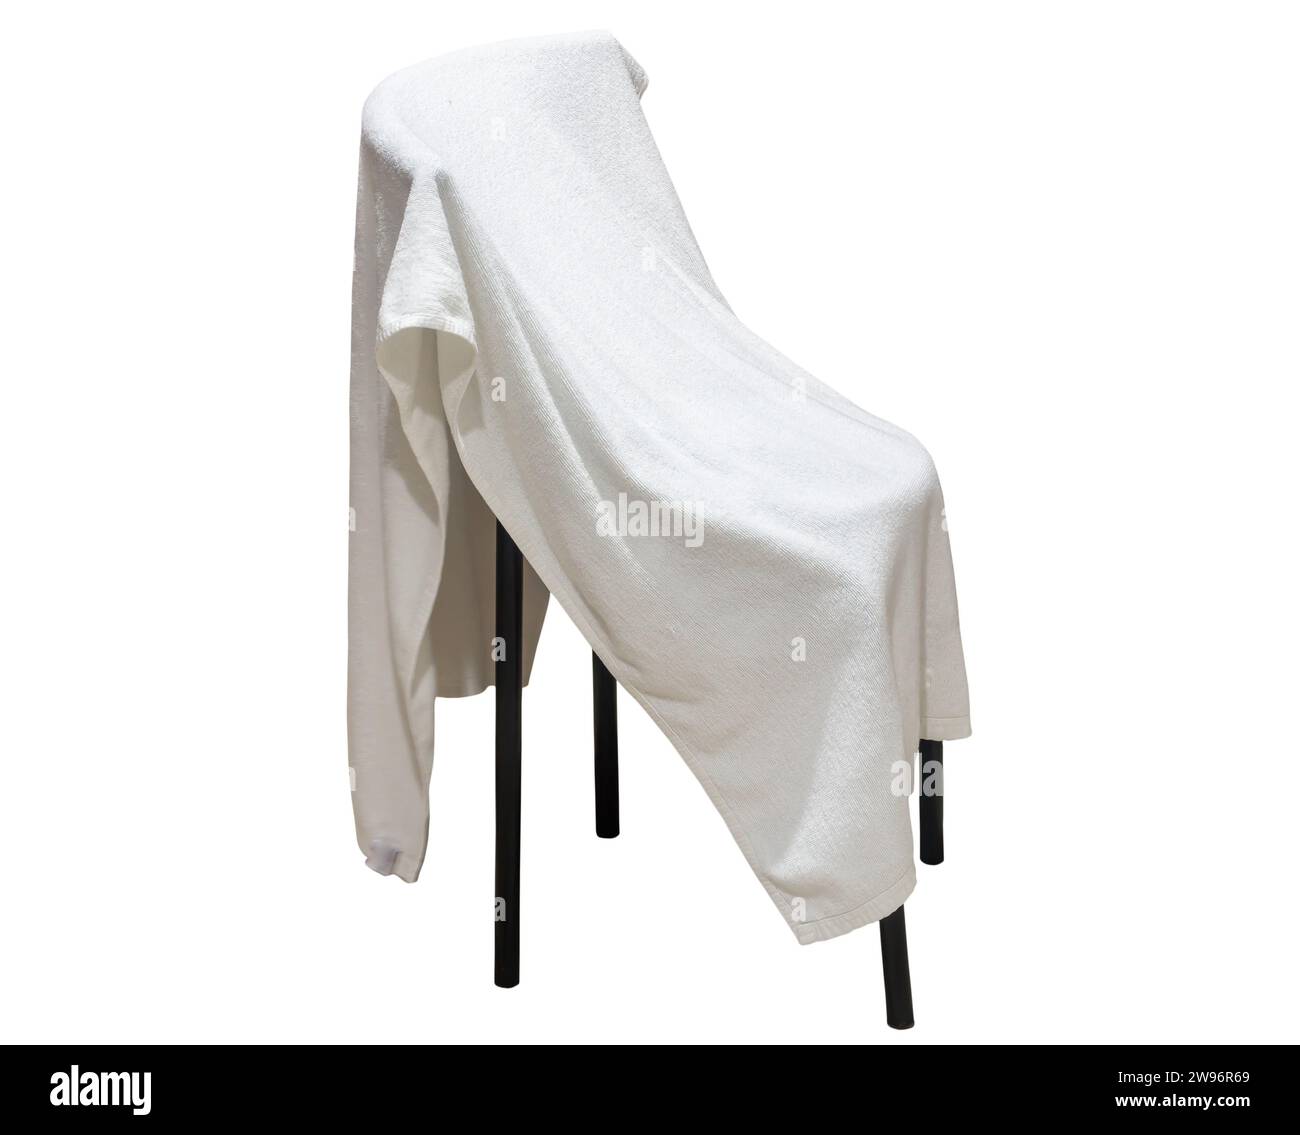 Used white towel laying on chair is isolated on white background with clipping path. Stock Photo